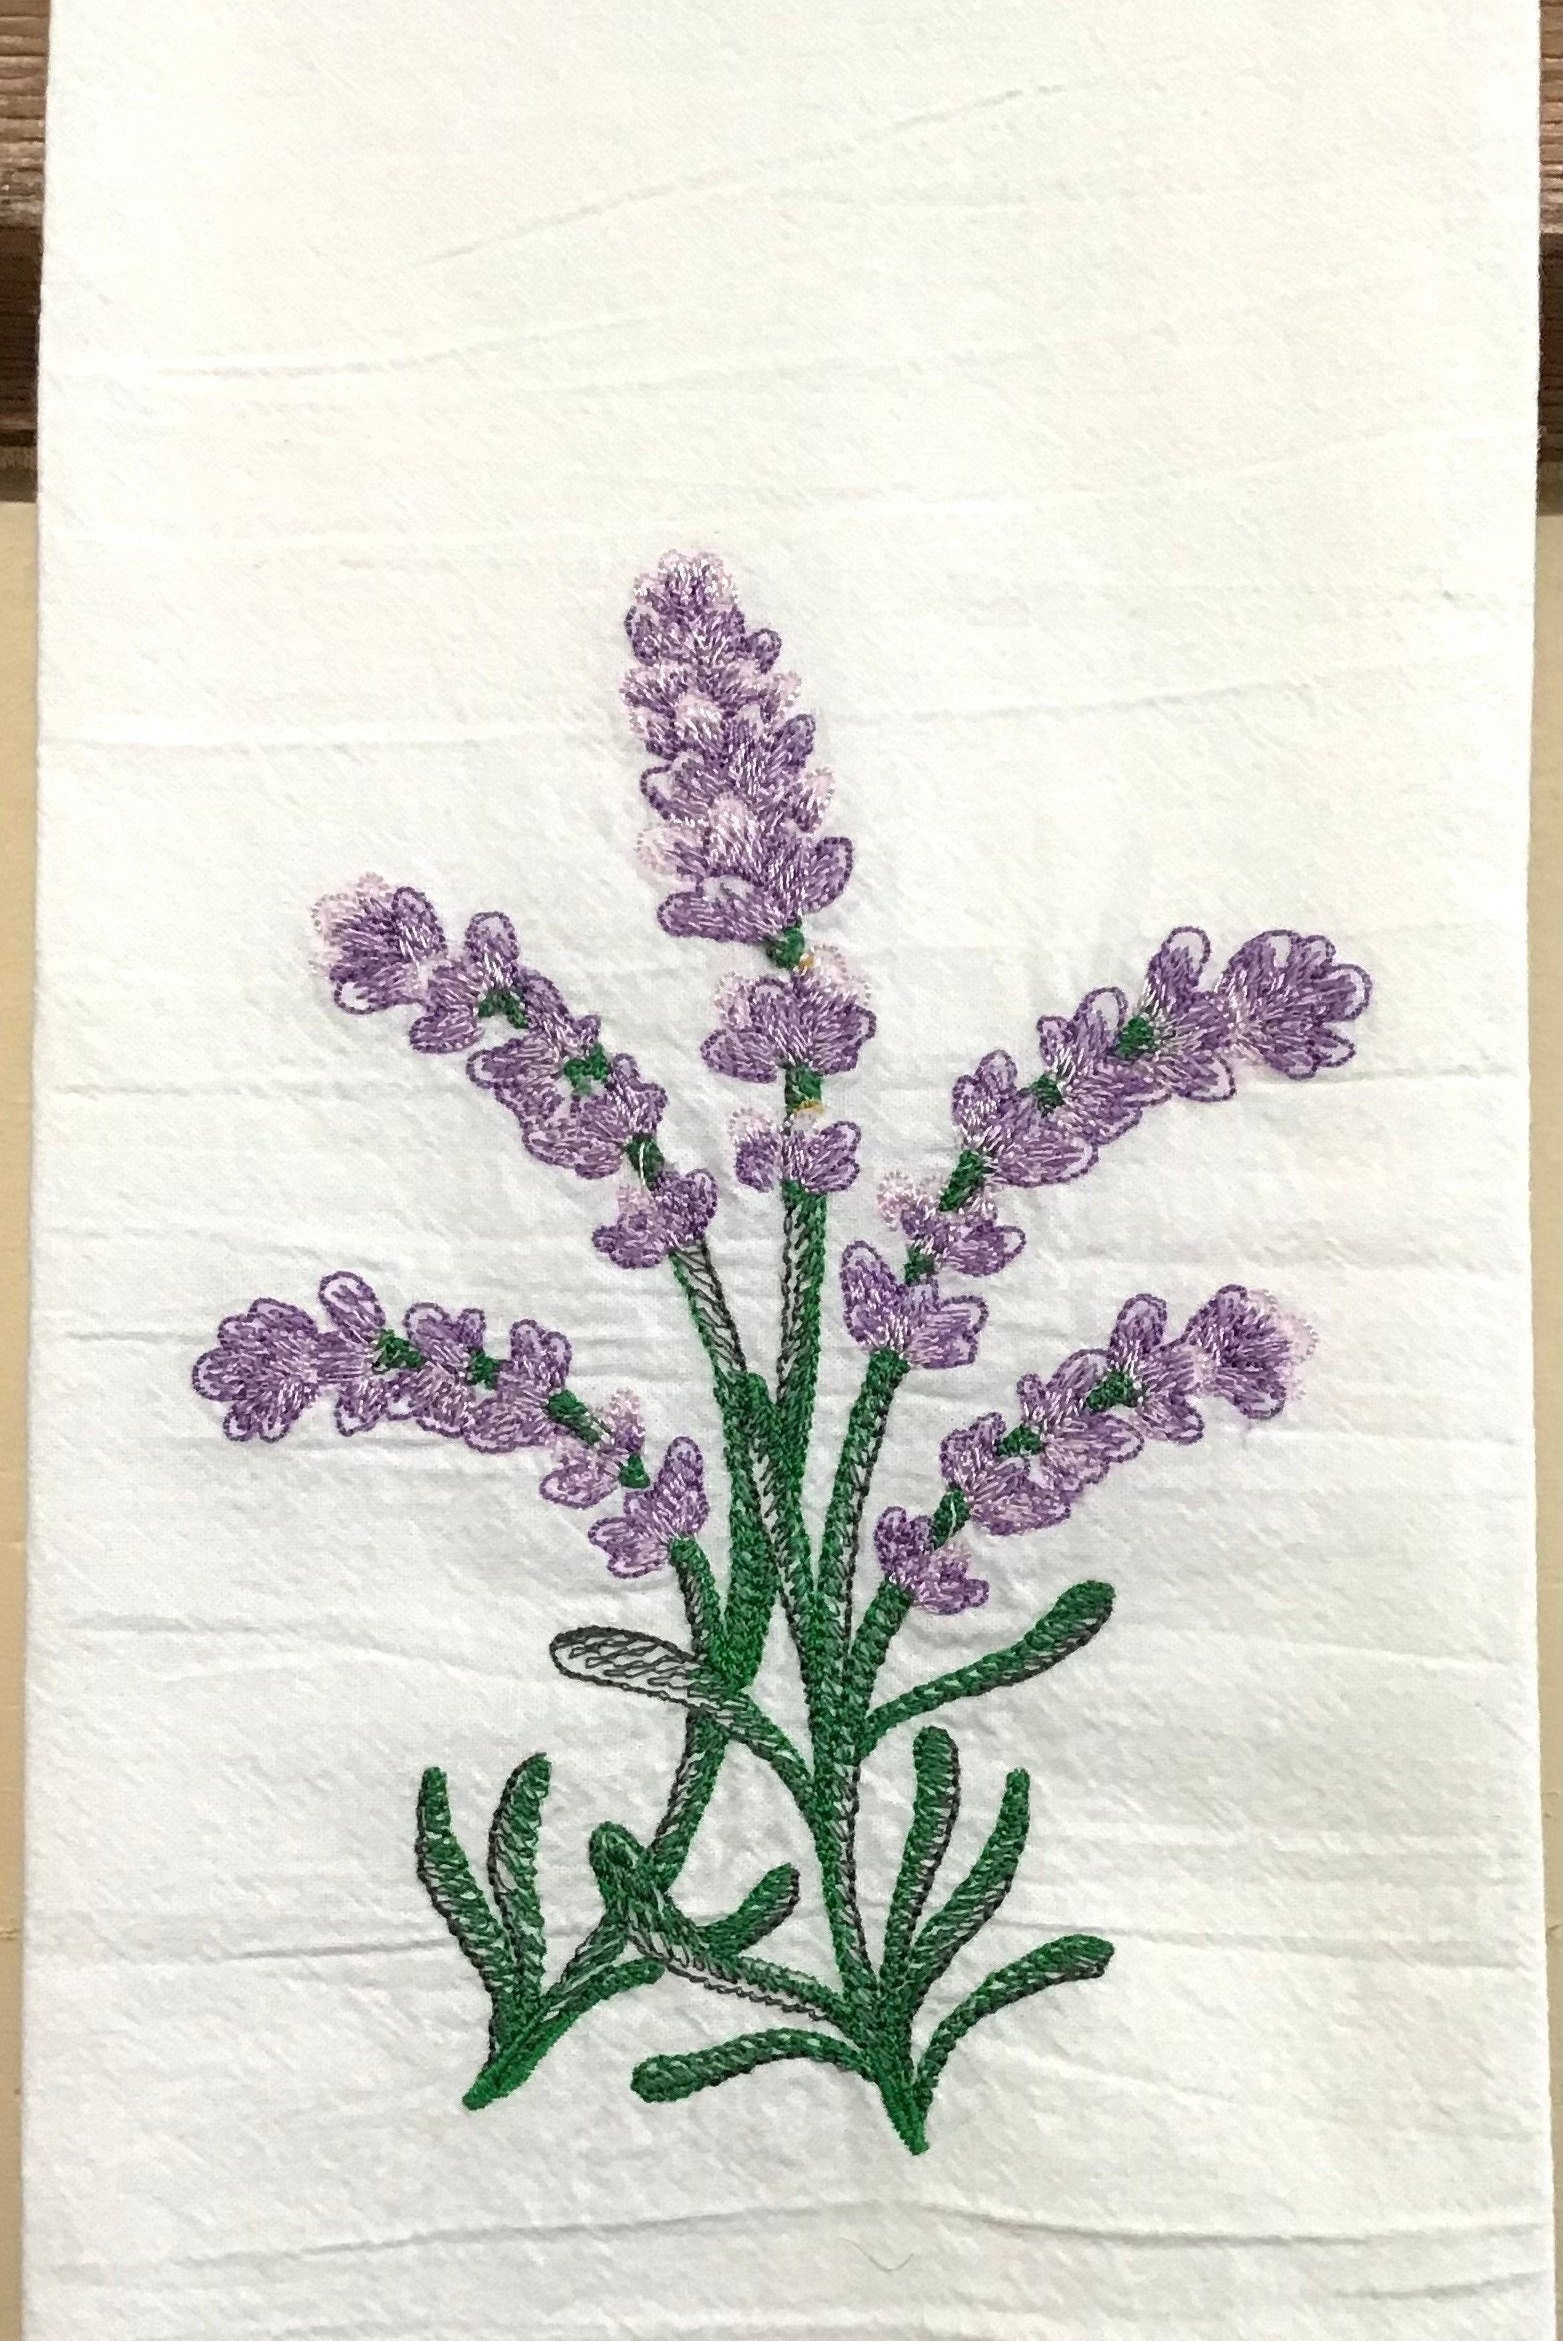 Lavien Home, Dish Towels for Kitchen Lavender Embroidery Super Absorbent  and Sof